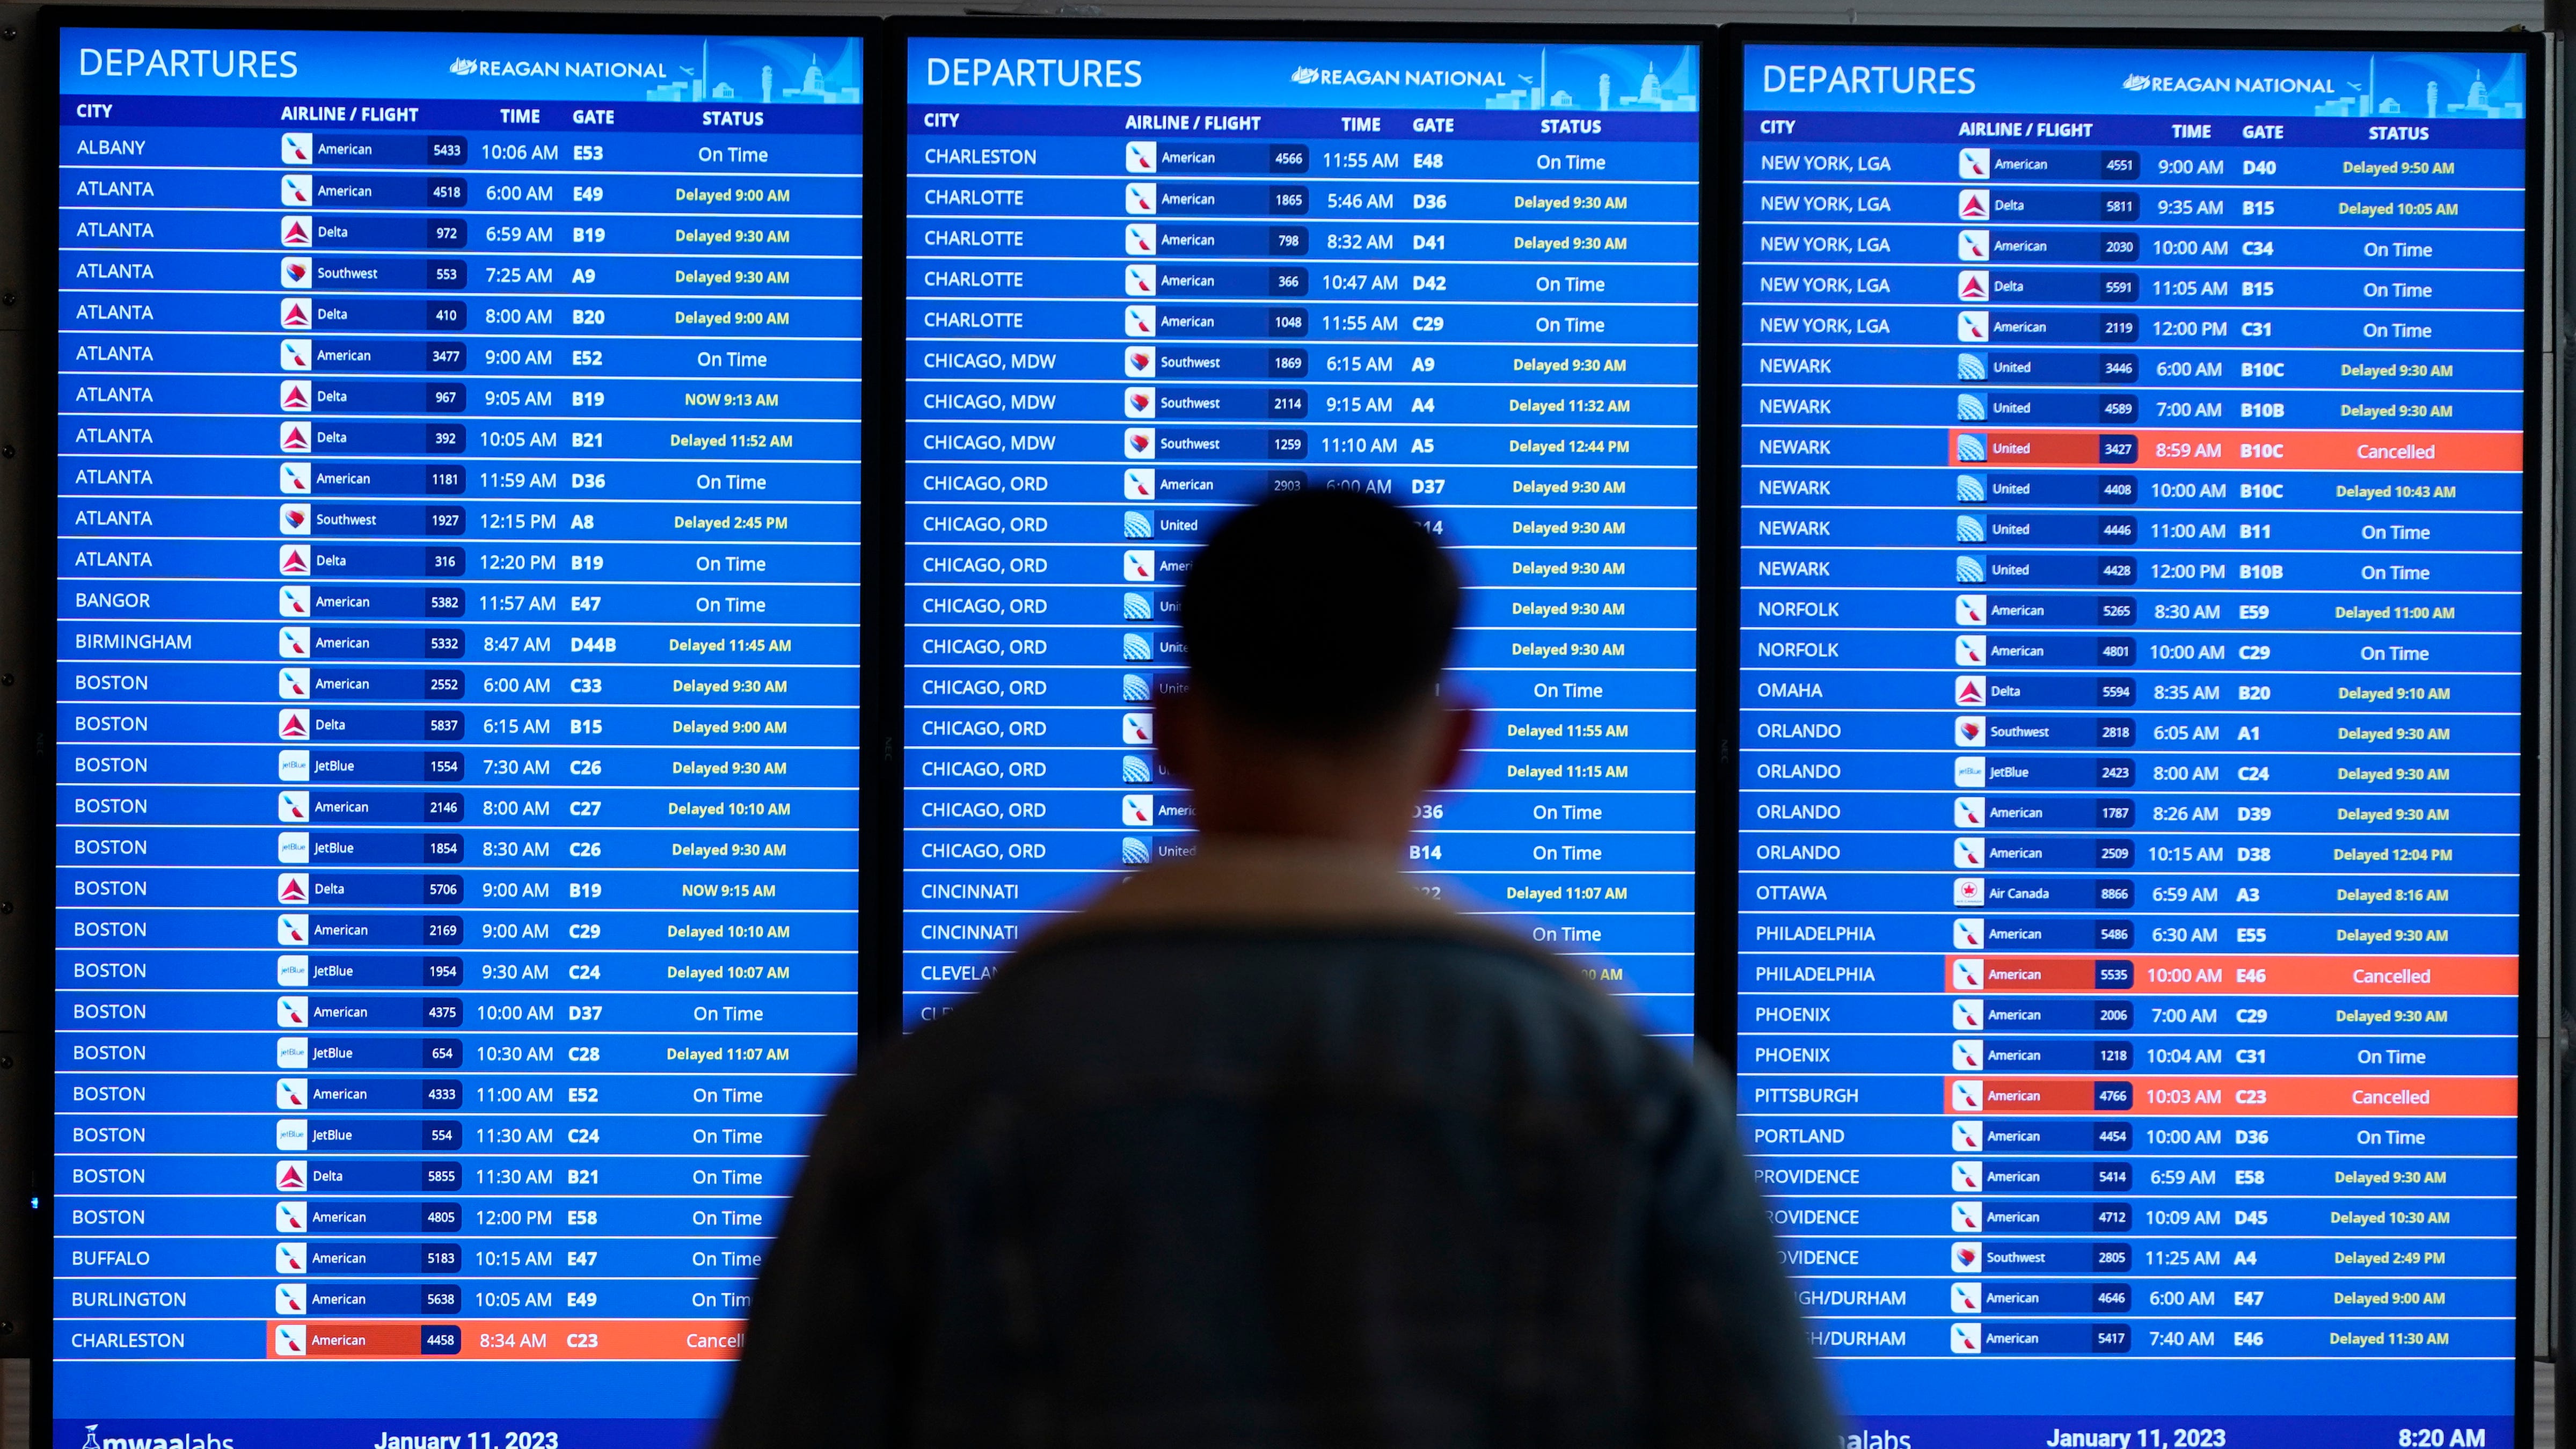 A traveler looks at a flight board with delays and cancellations at Ronald Reagan Washington National Airport in Arlington, Va., Wednesday, Jan. 11, 2023. Flights are being delayed at multiple locations across the United States after a computer outage at the Federal Aviation Administration.